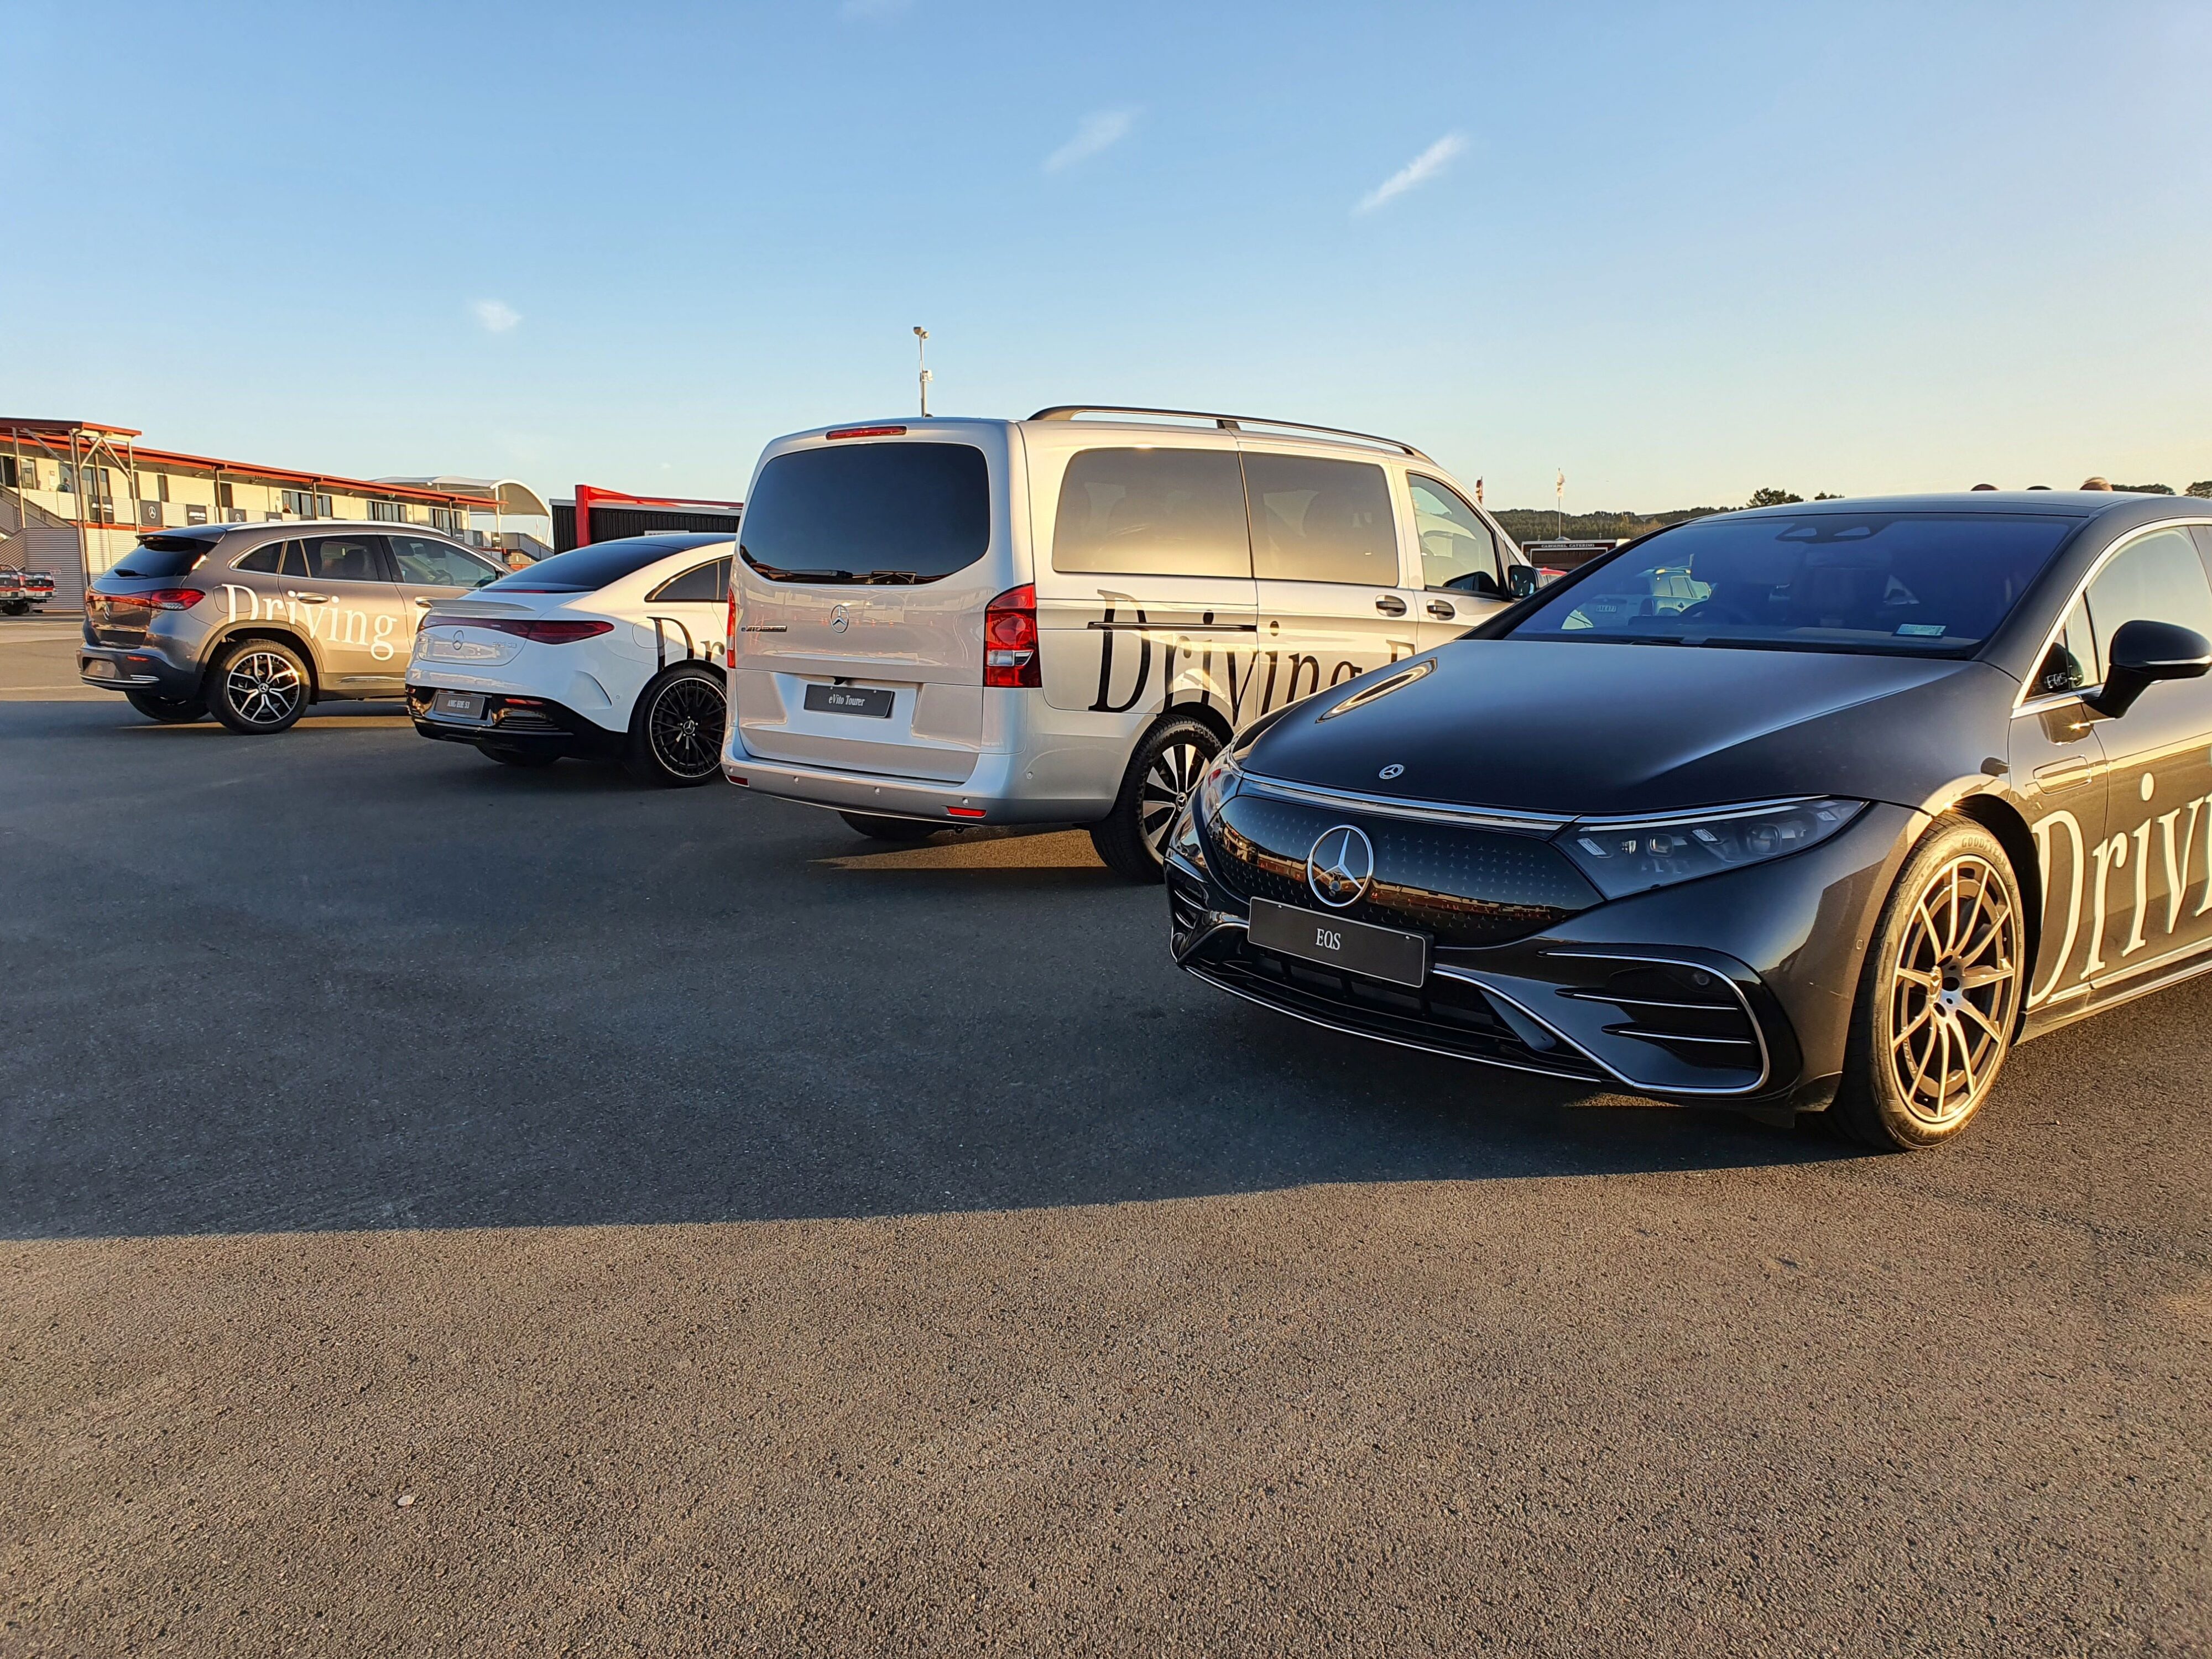 A range of Mercedes-EQ cars in frame including an EQS, eVito, EQE53AMG and EQA as part of Mercedes' Driving Event at Hampton Downs Motorsport Park NZ.